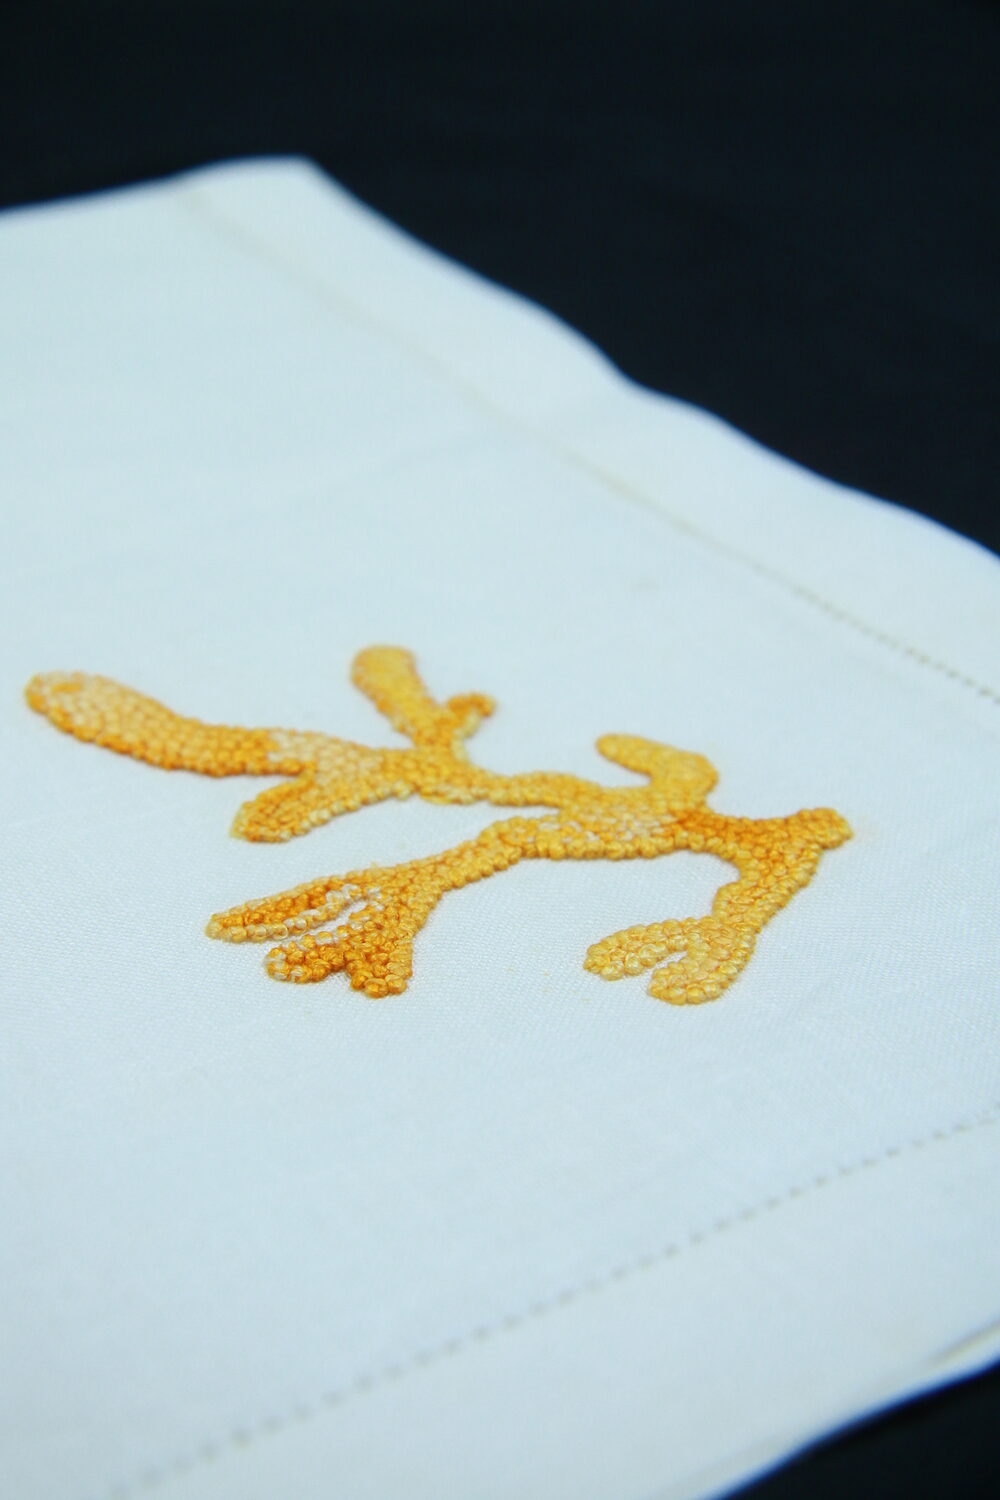 Coral Hand Embroidered Napkins